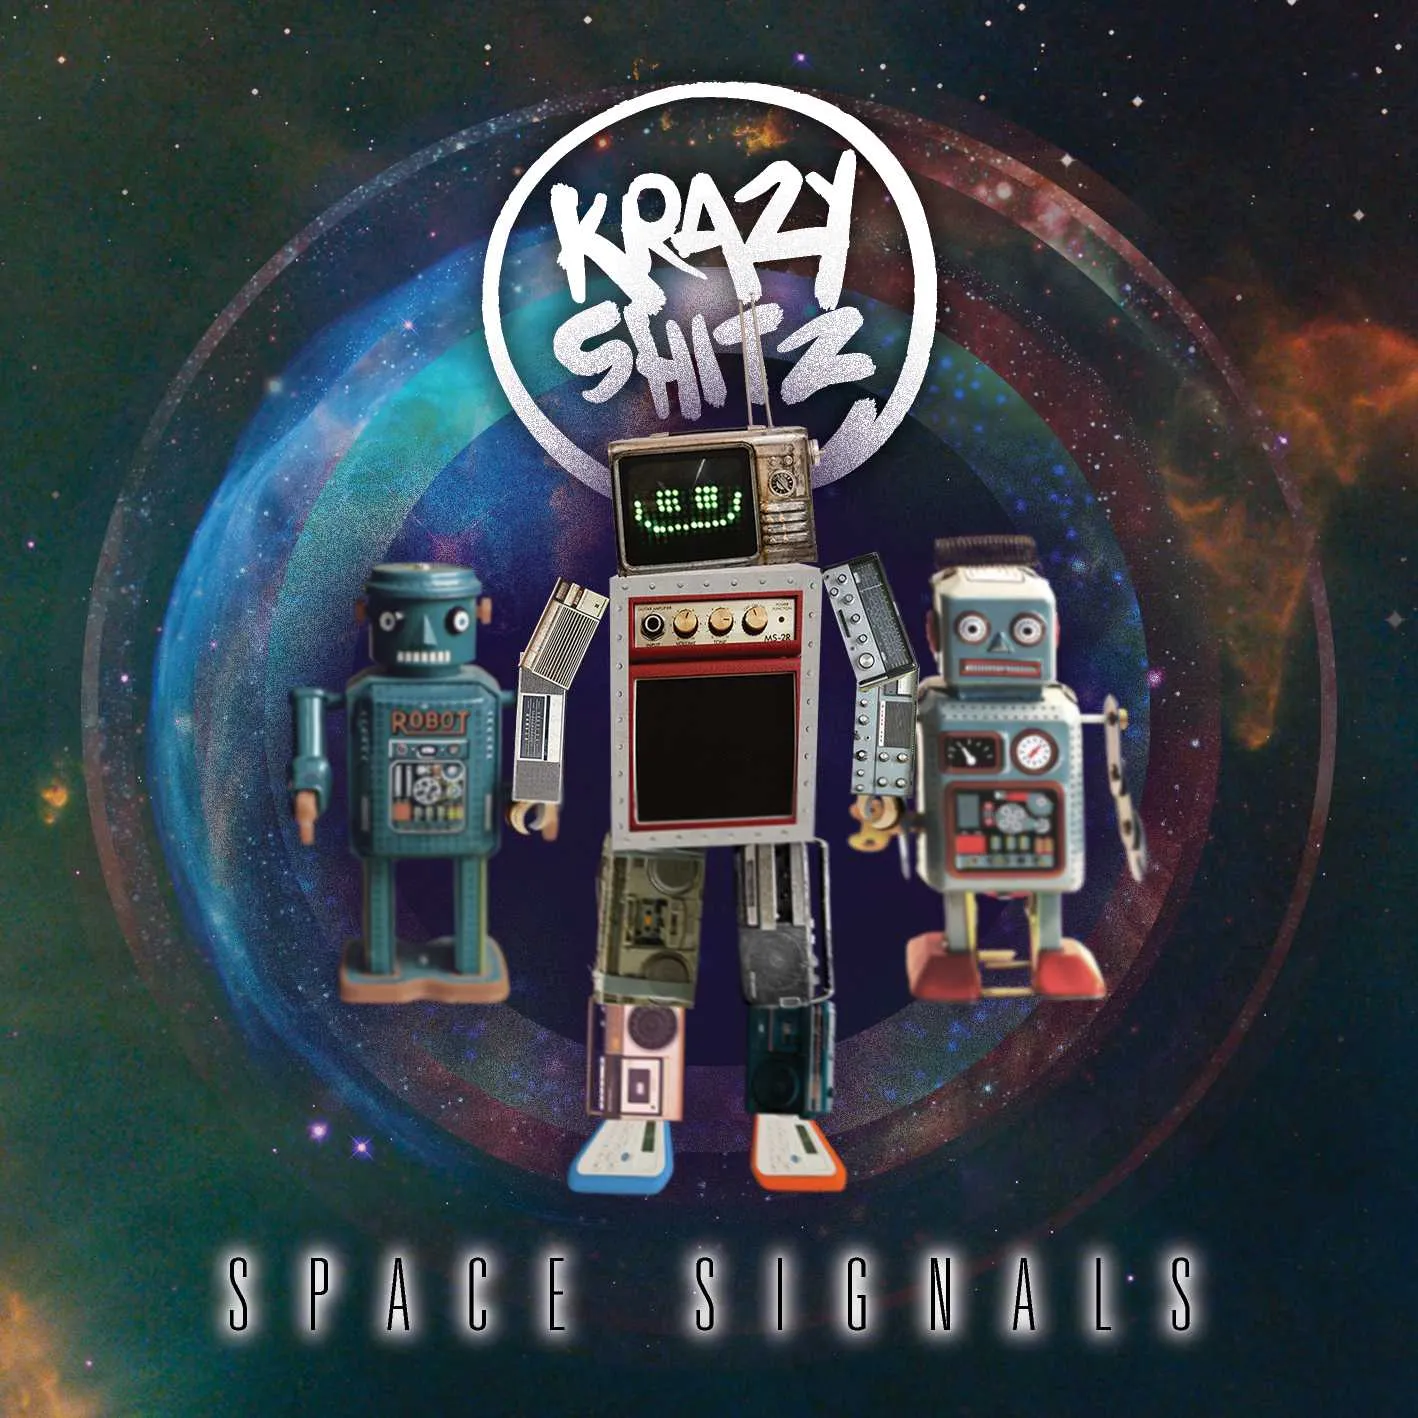 Album cover for “Space Signals” by Krazy Shitz